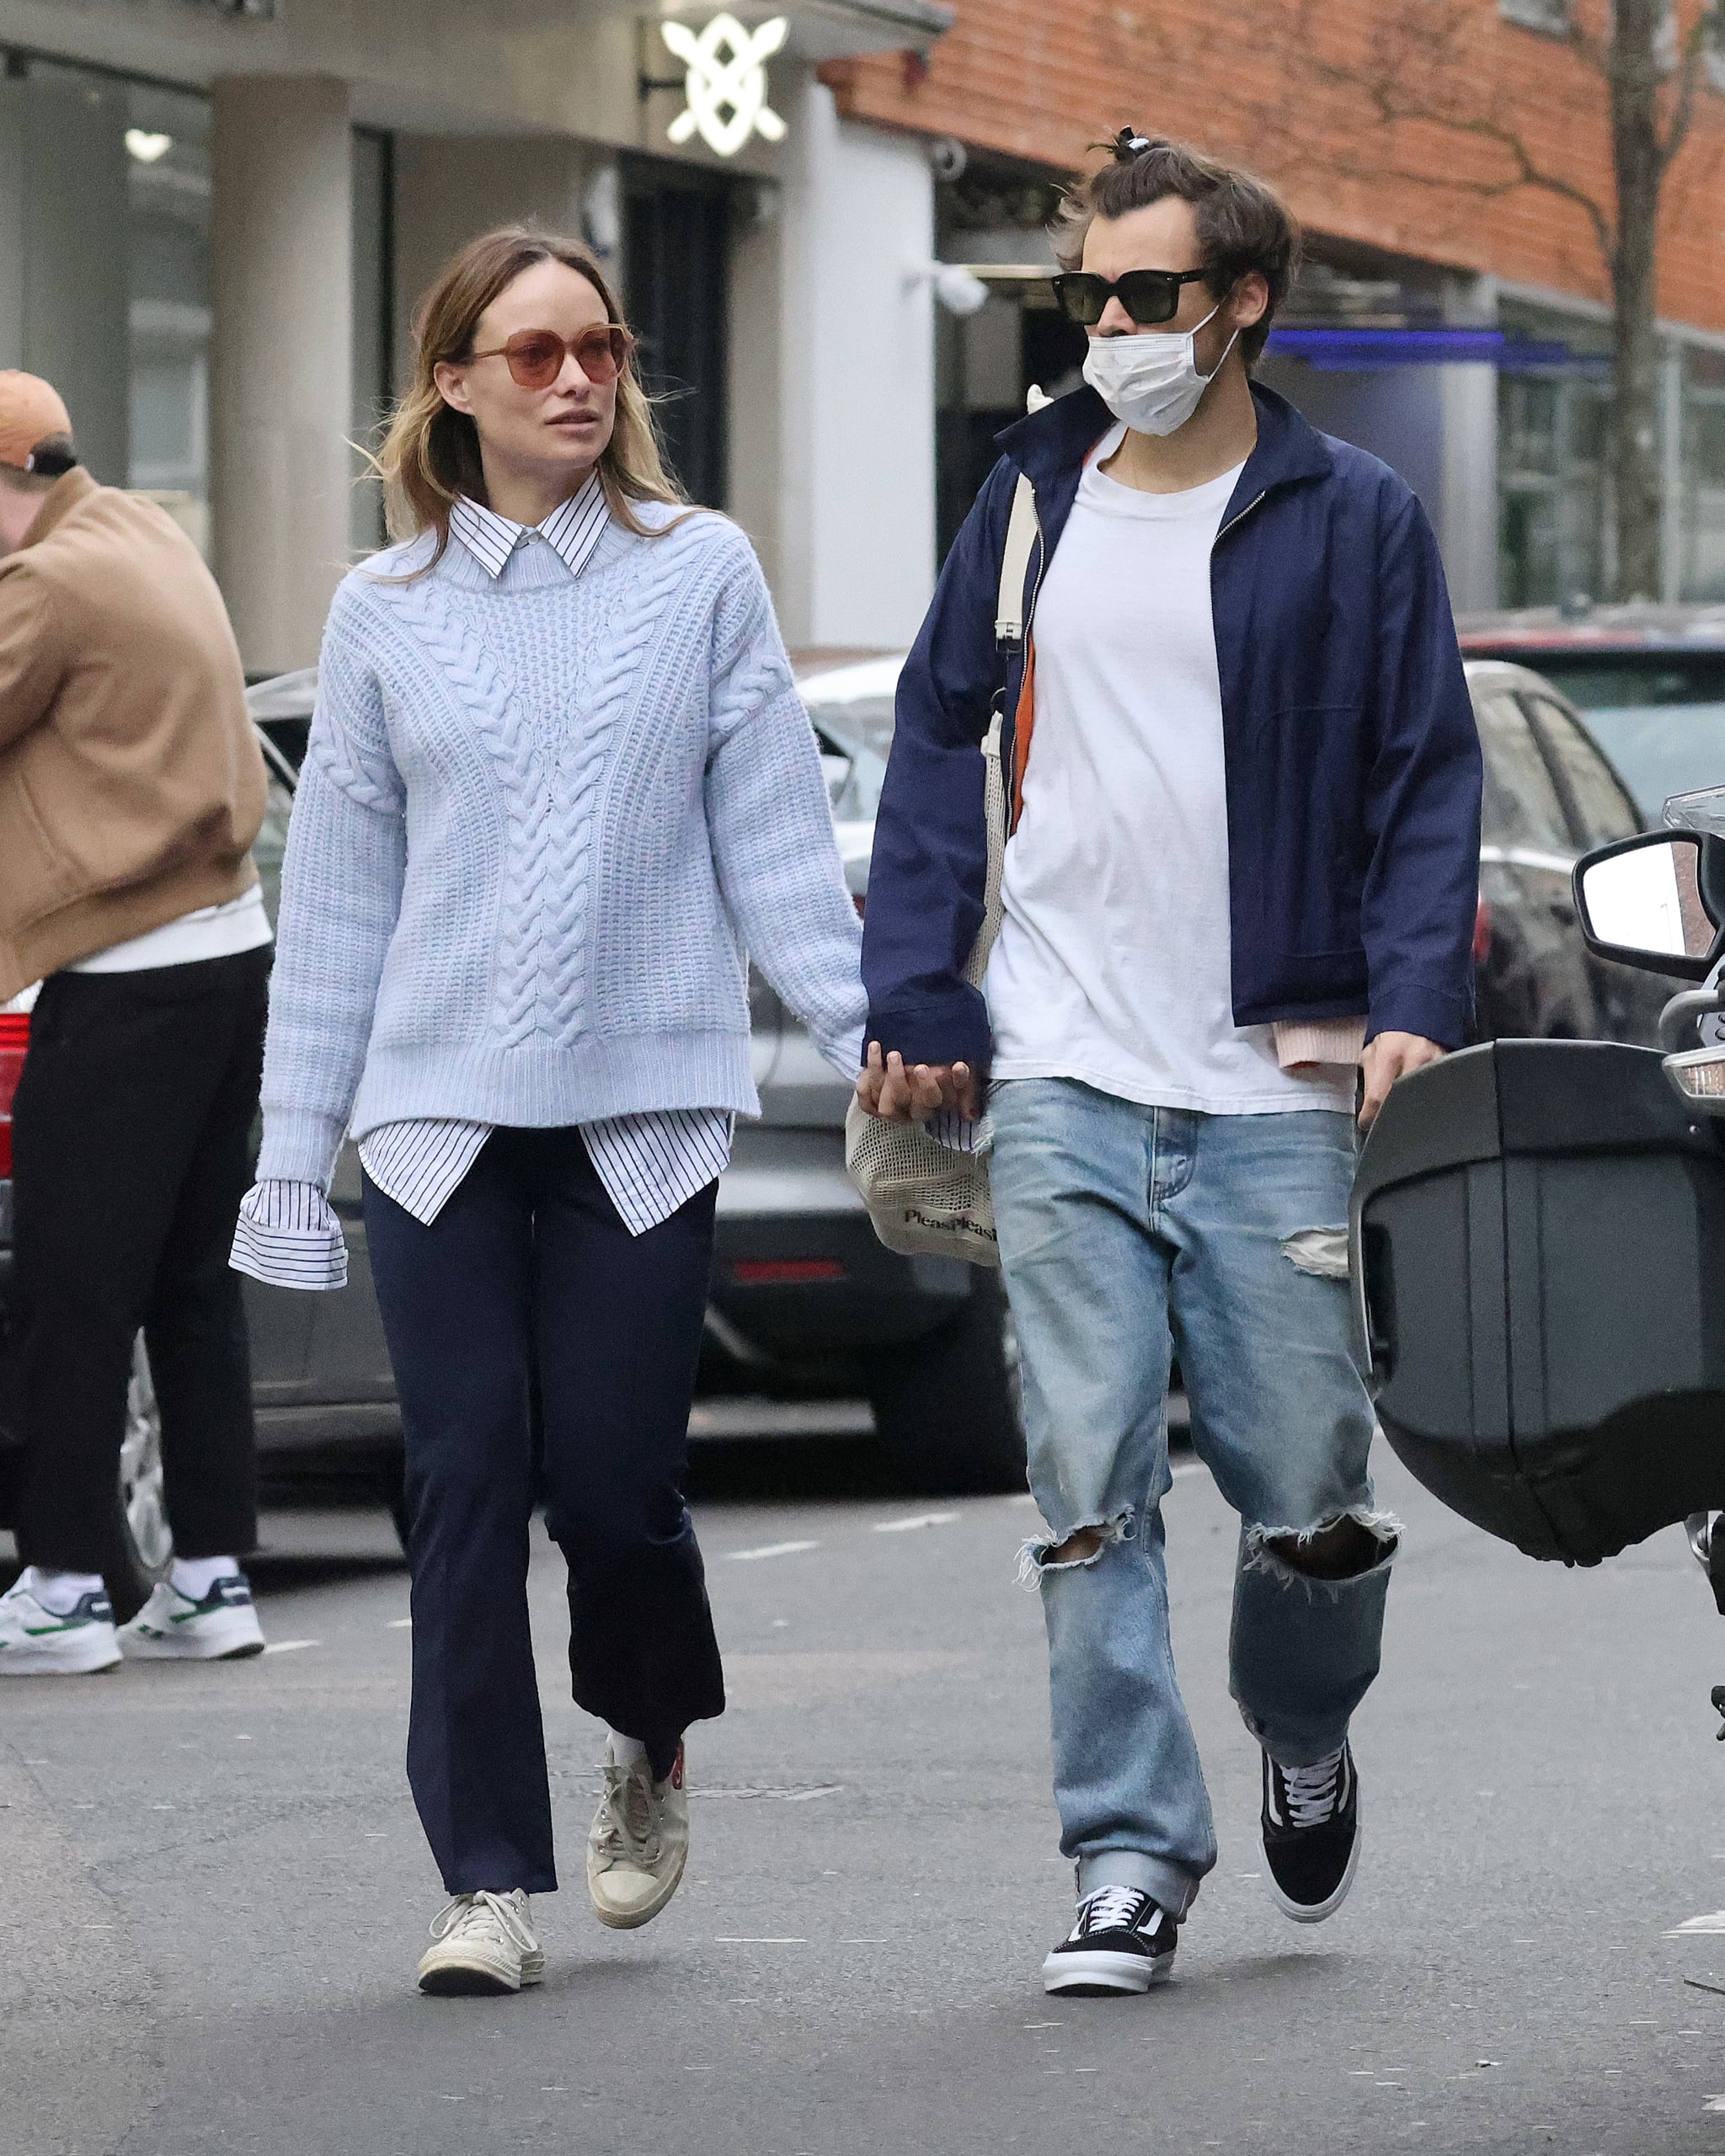 LONDON, ENGLAND - MARCH 15: Harry Styles and Olivia Wilde are seen in Soho on March 15, 2022 in London, England.  (Photo: Neil Mockford/GC Images)